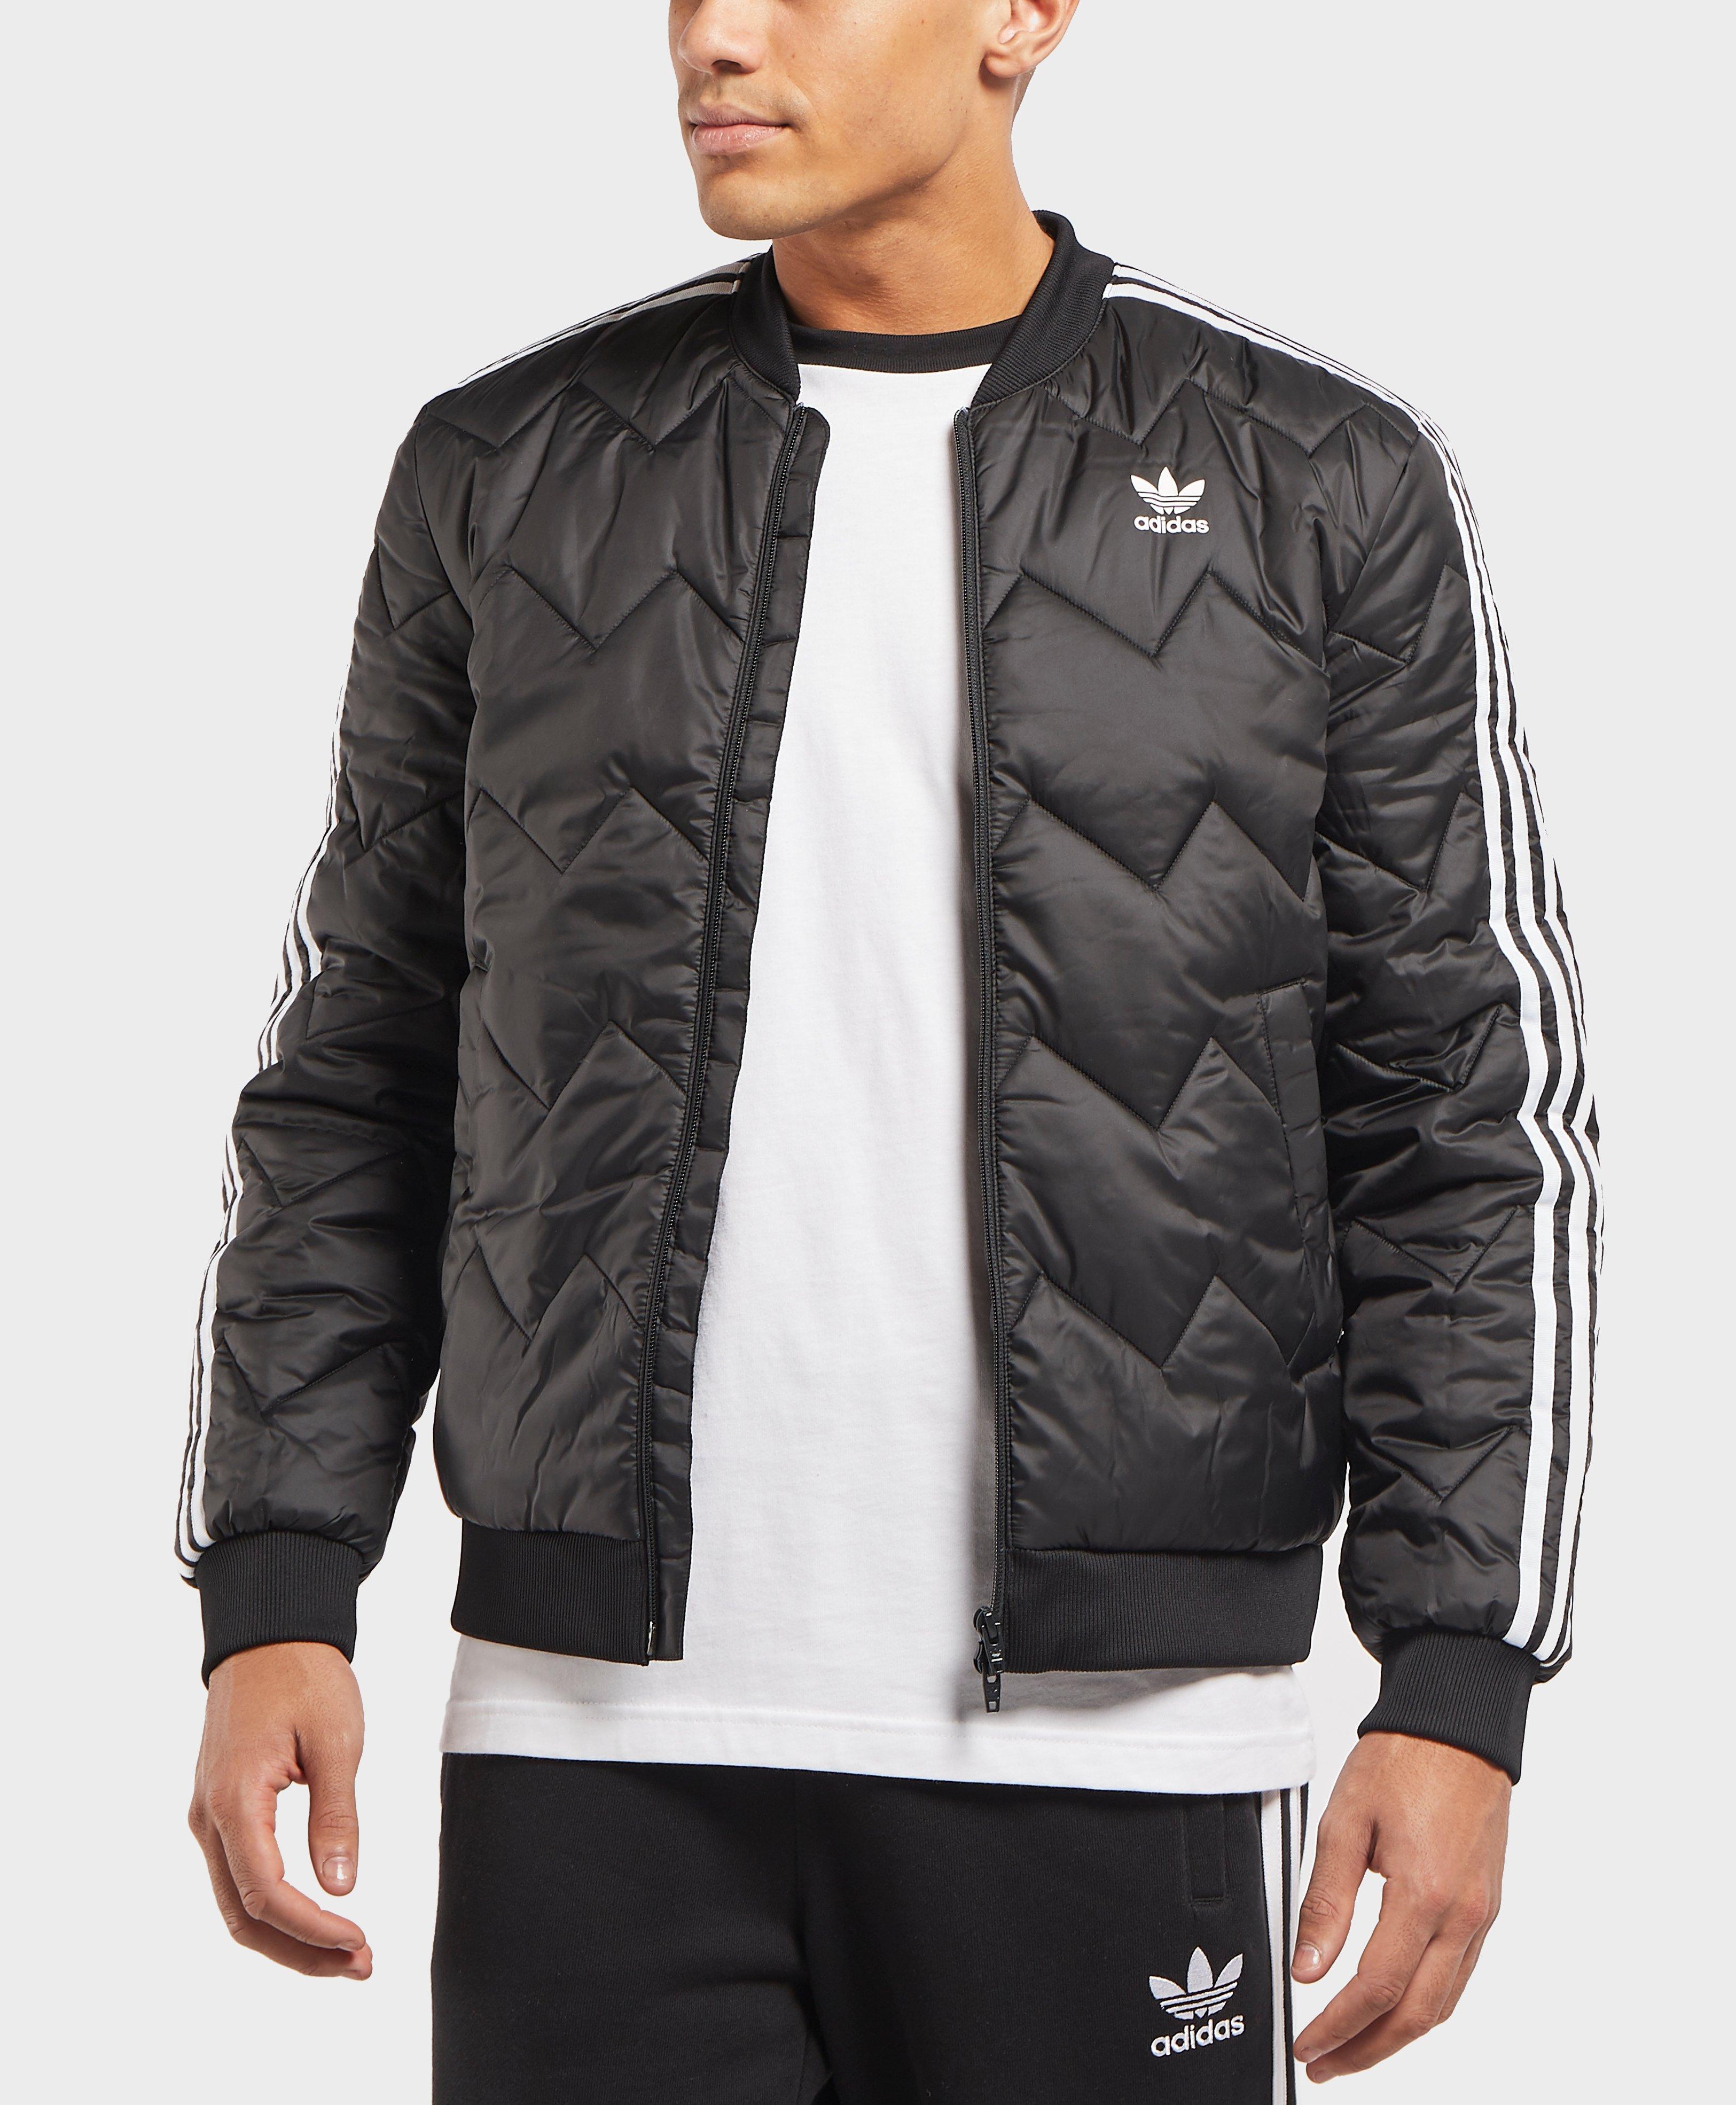 adidas quilted bomber jacket